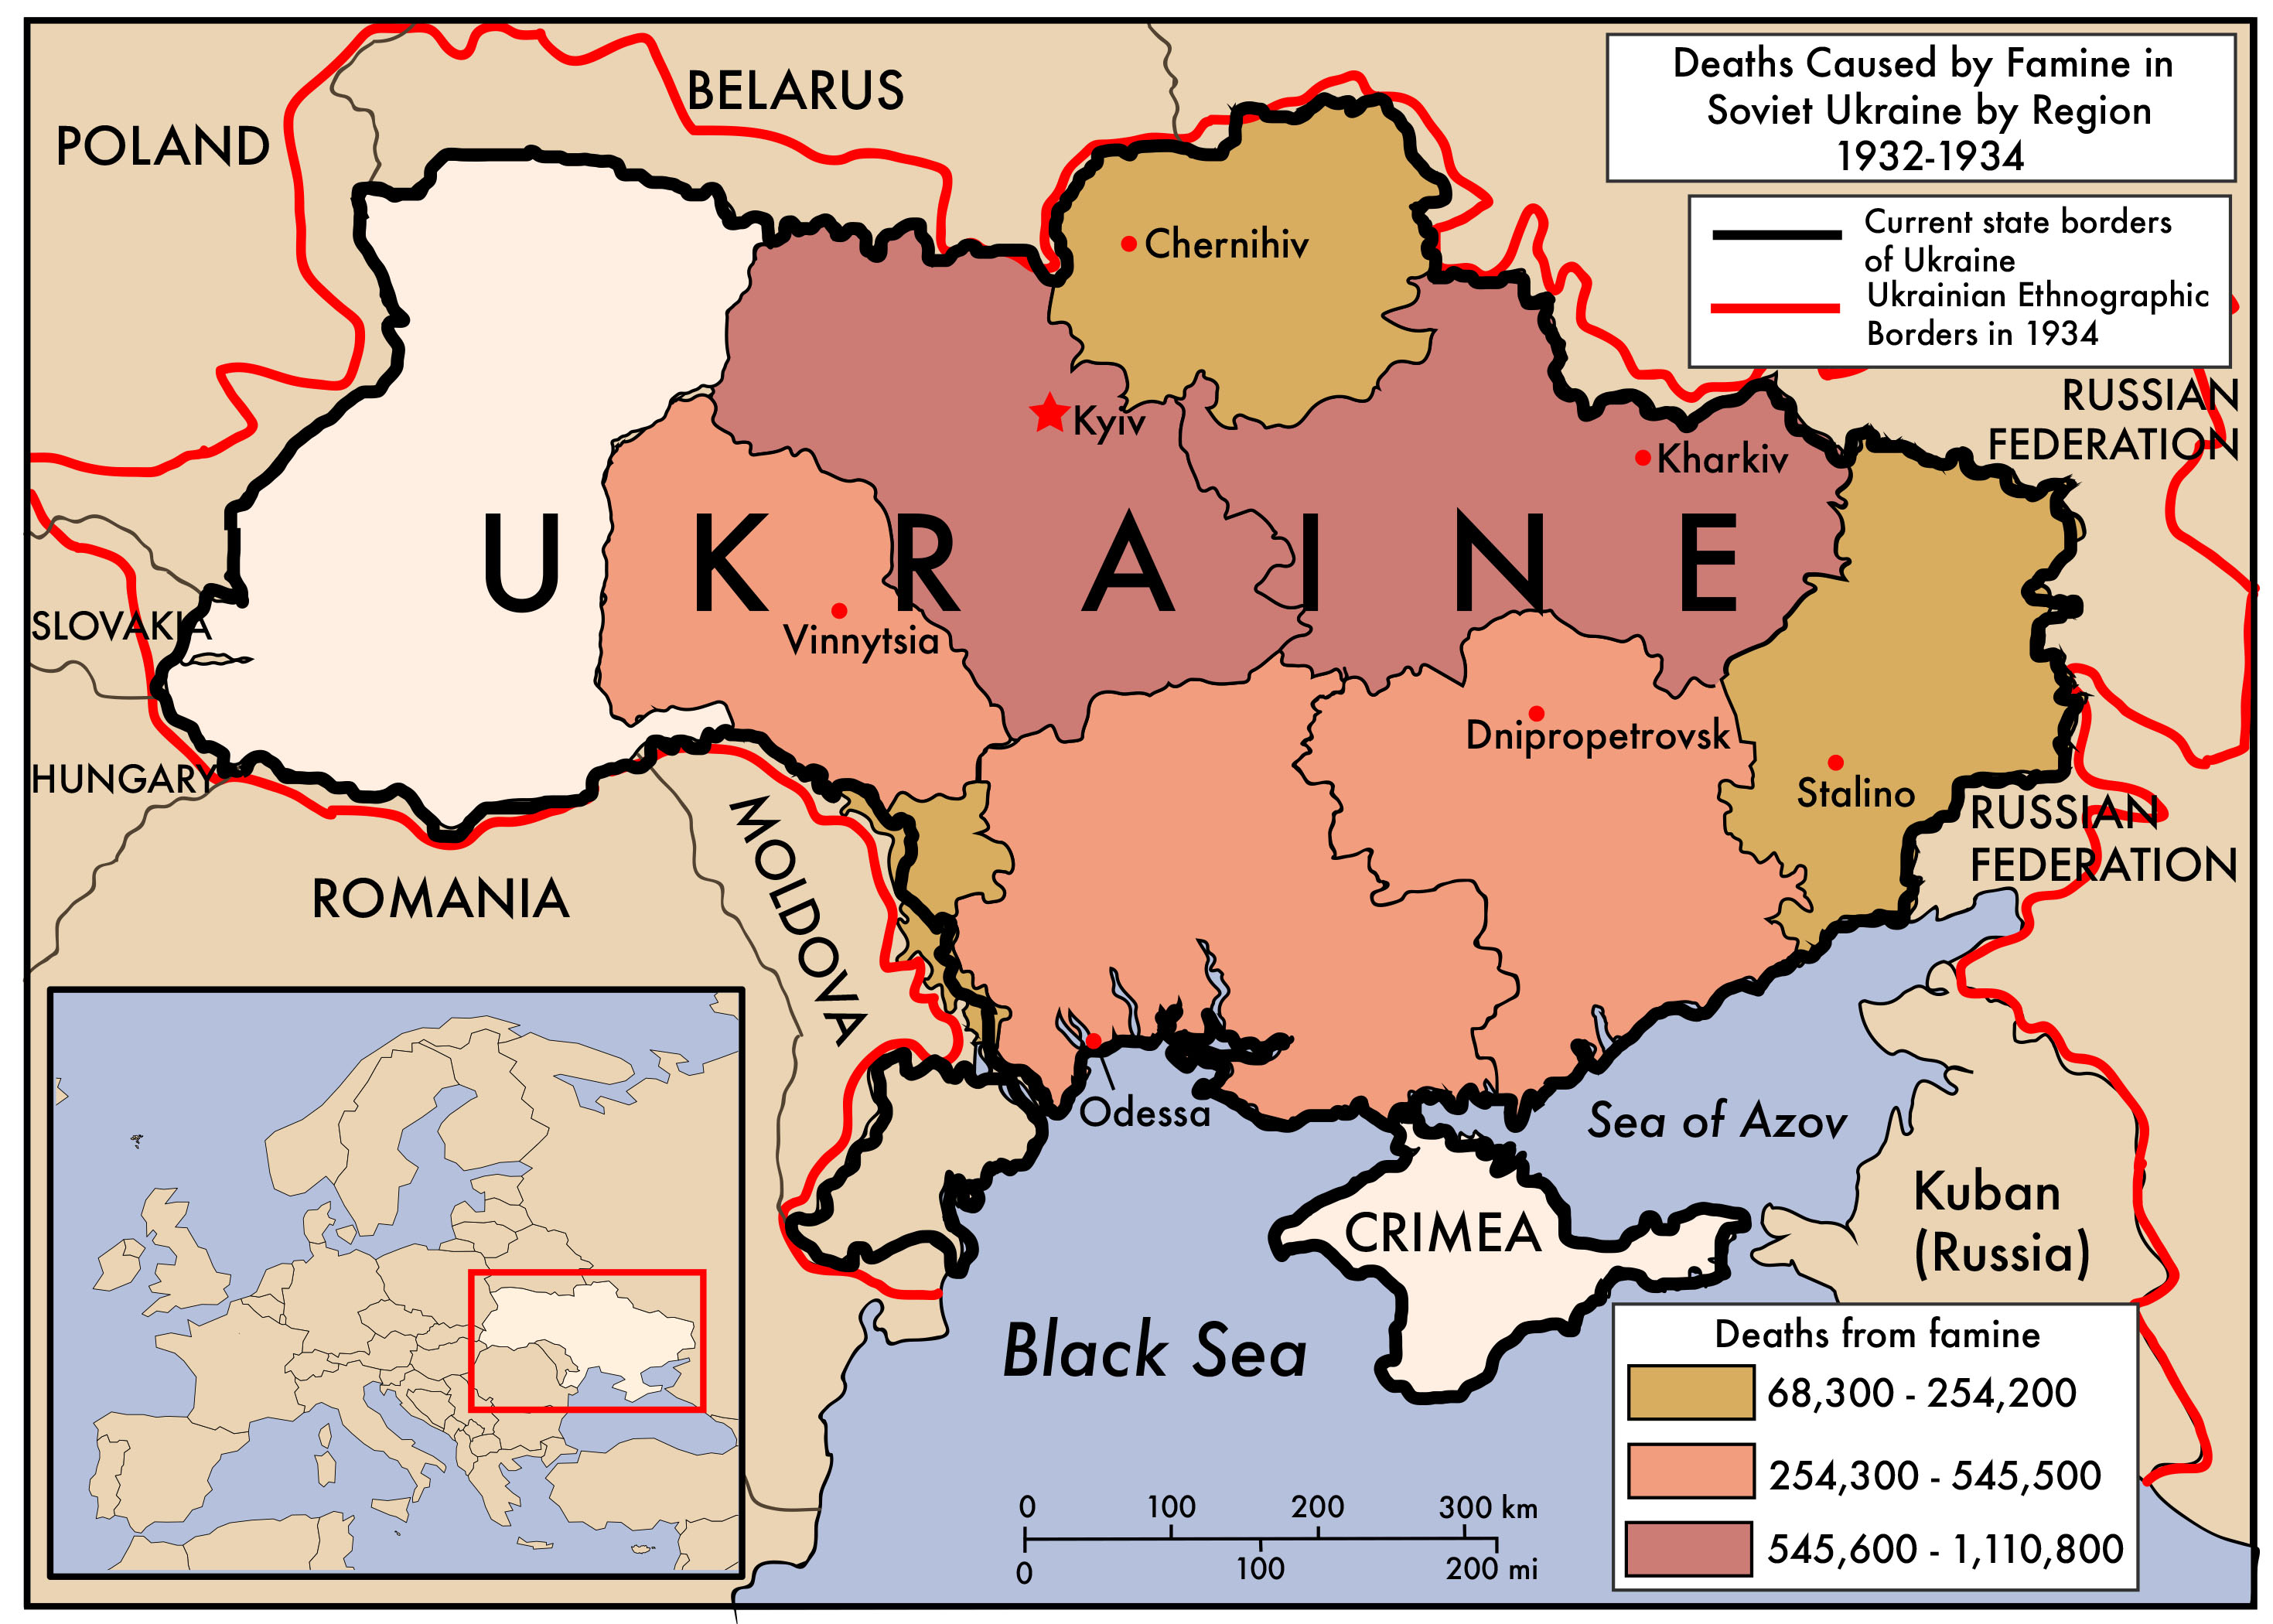 Map of Ukraine showing death totals by region. The famine caused the most deaths in northern central Ukraine. 